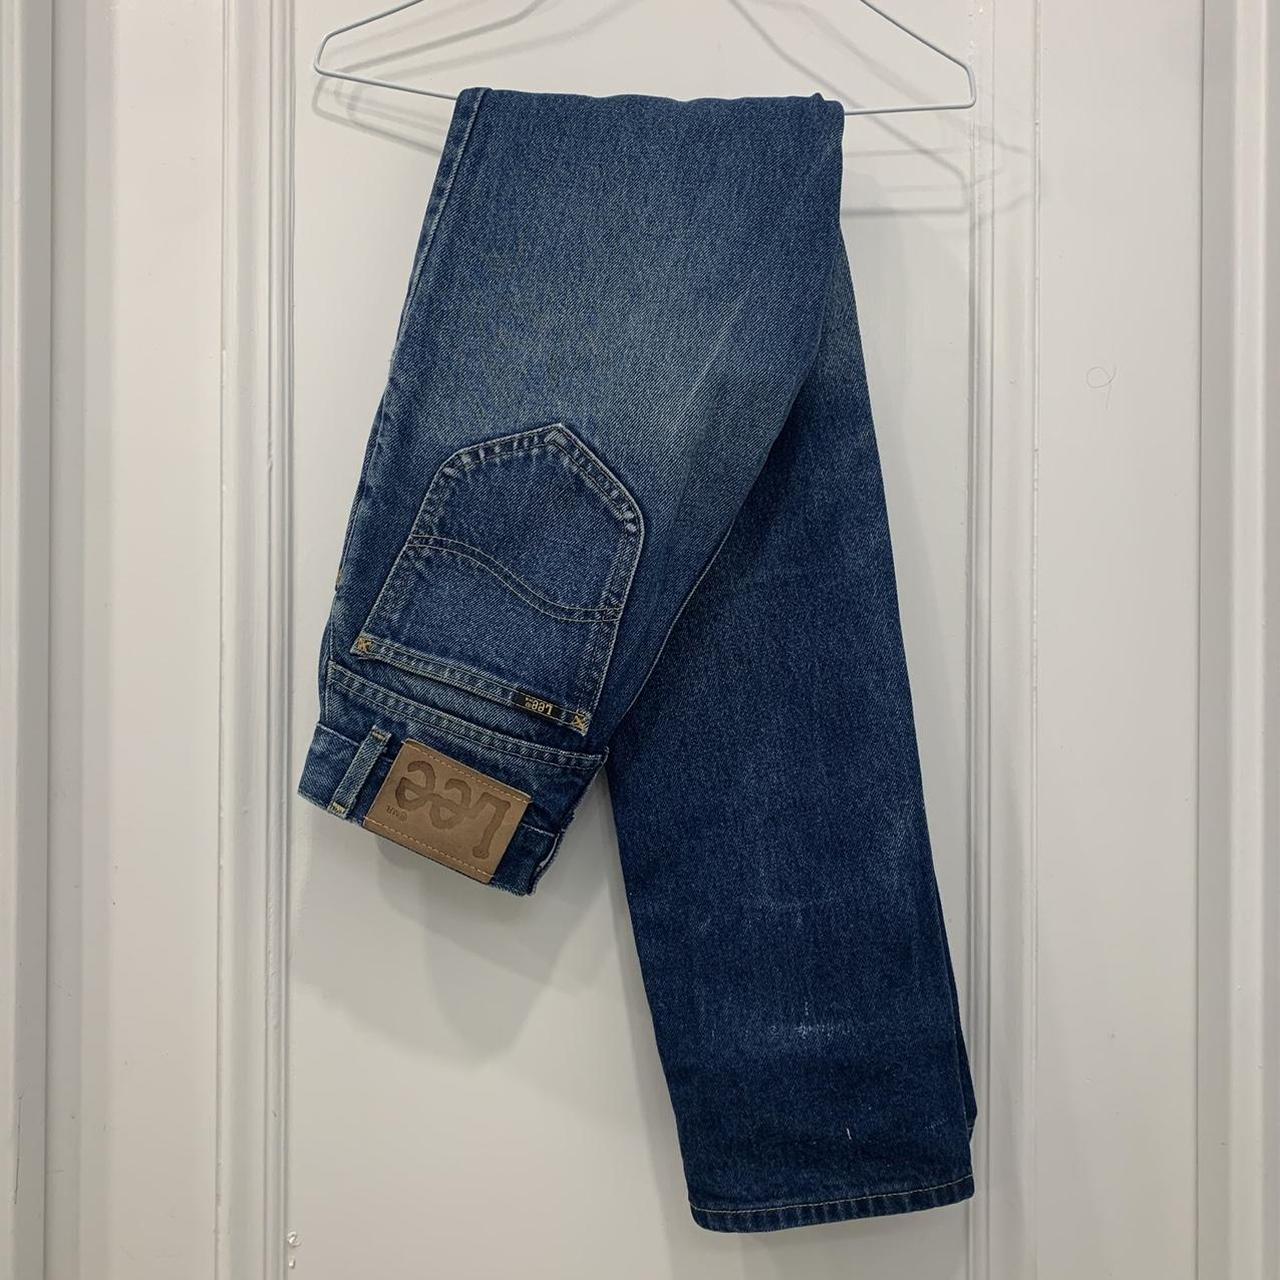 Authentic vintage lee jeans ©1980s. Mid wash with a... - Depop